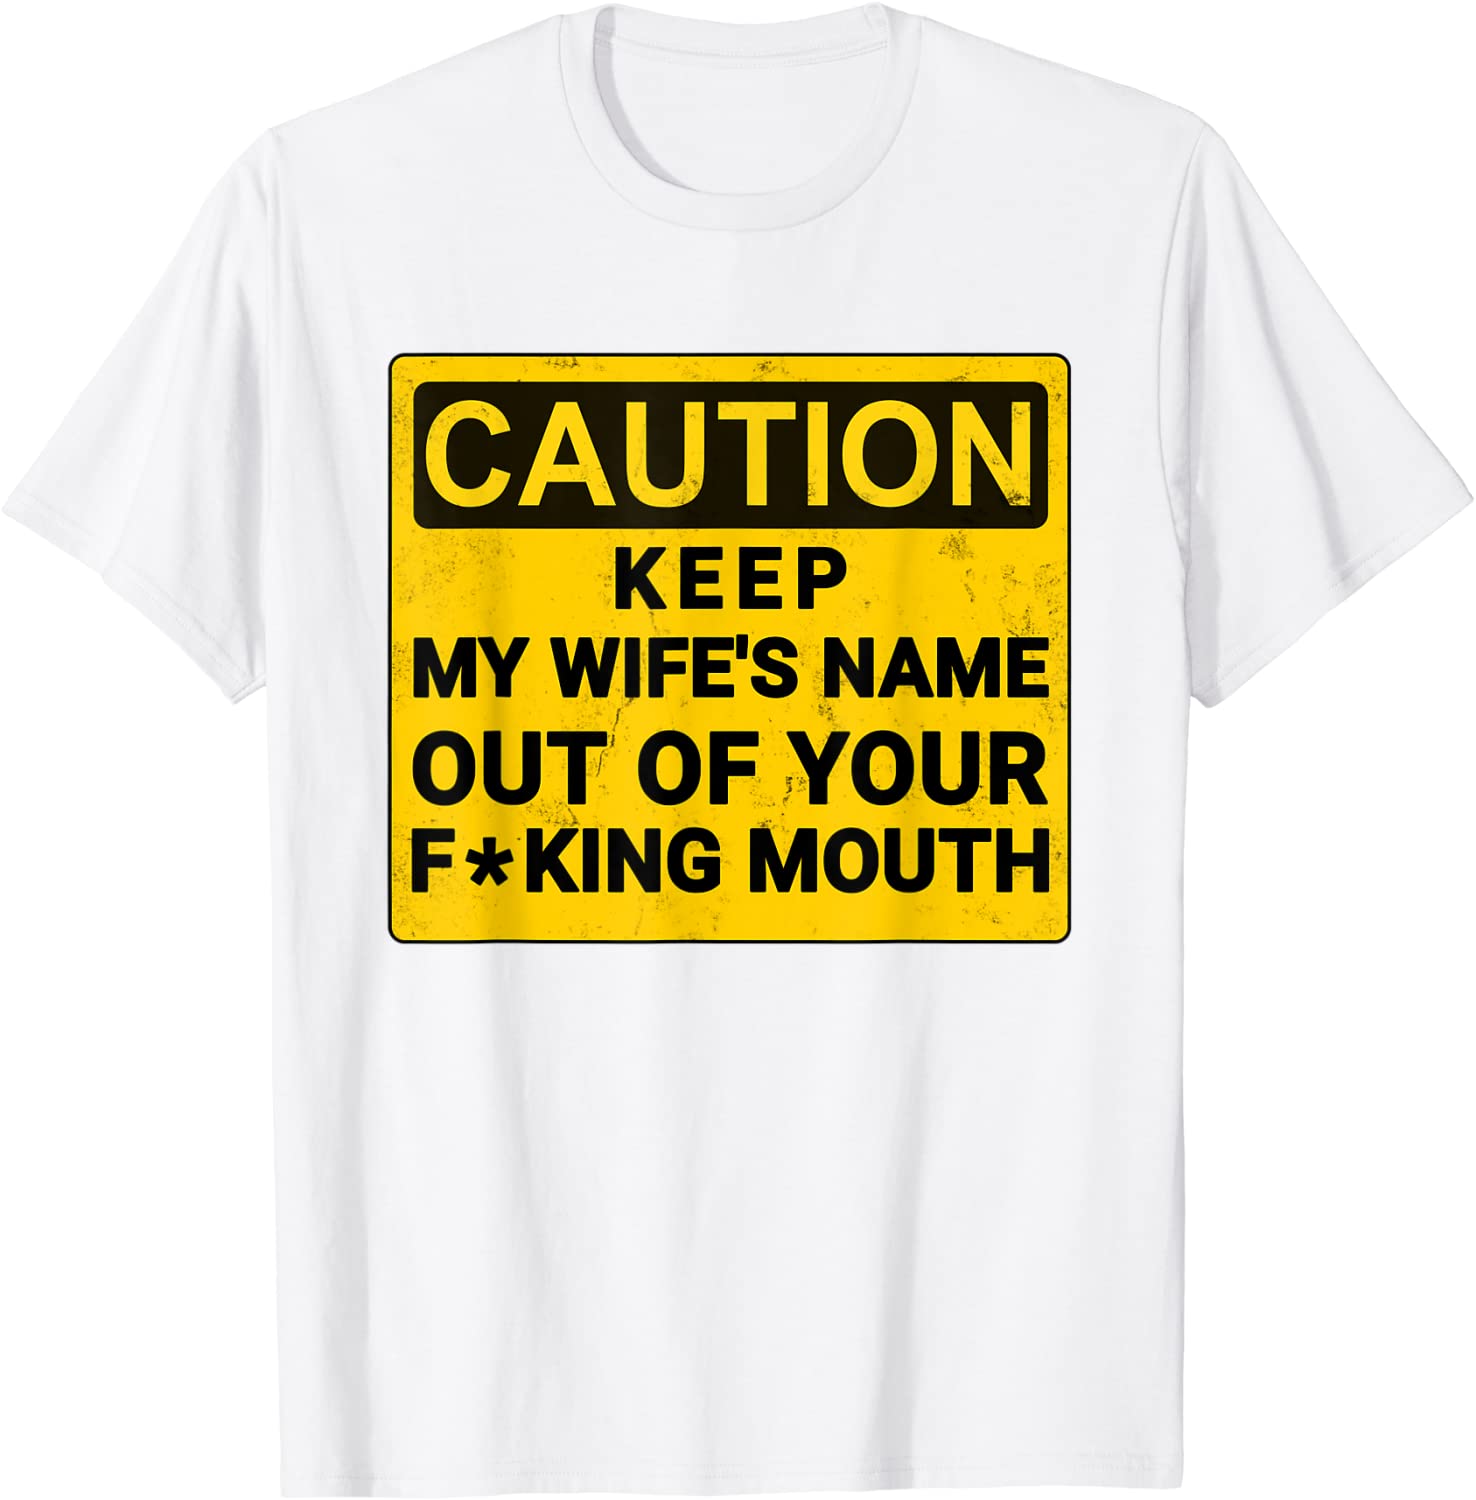 Keep My Wifes Name Out Of Your Mouth 2022 T Shirt Teeducks 